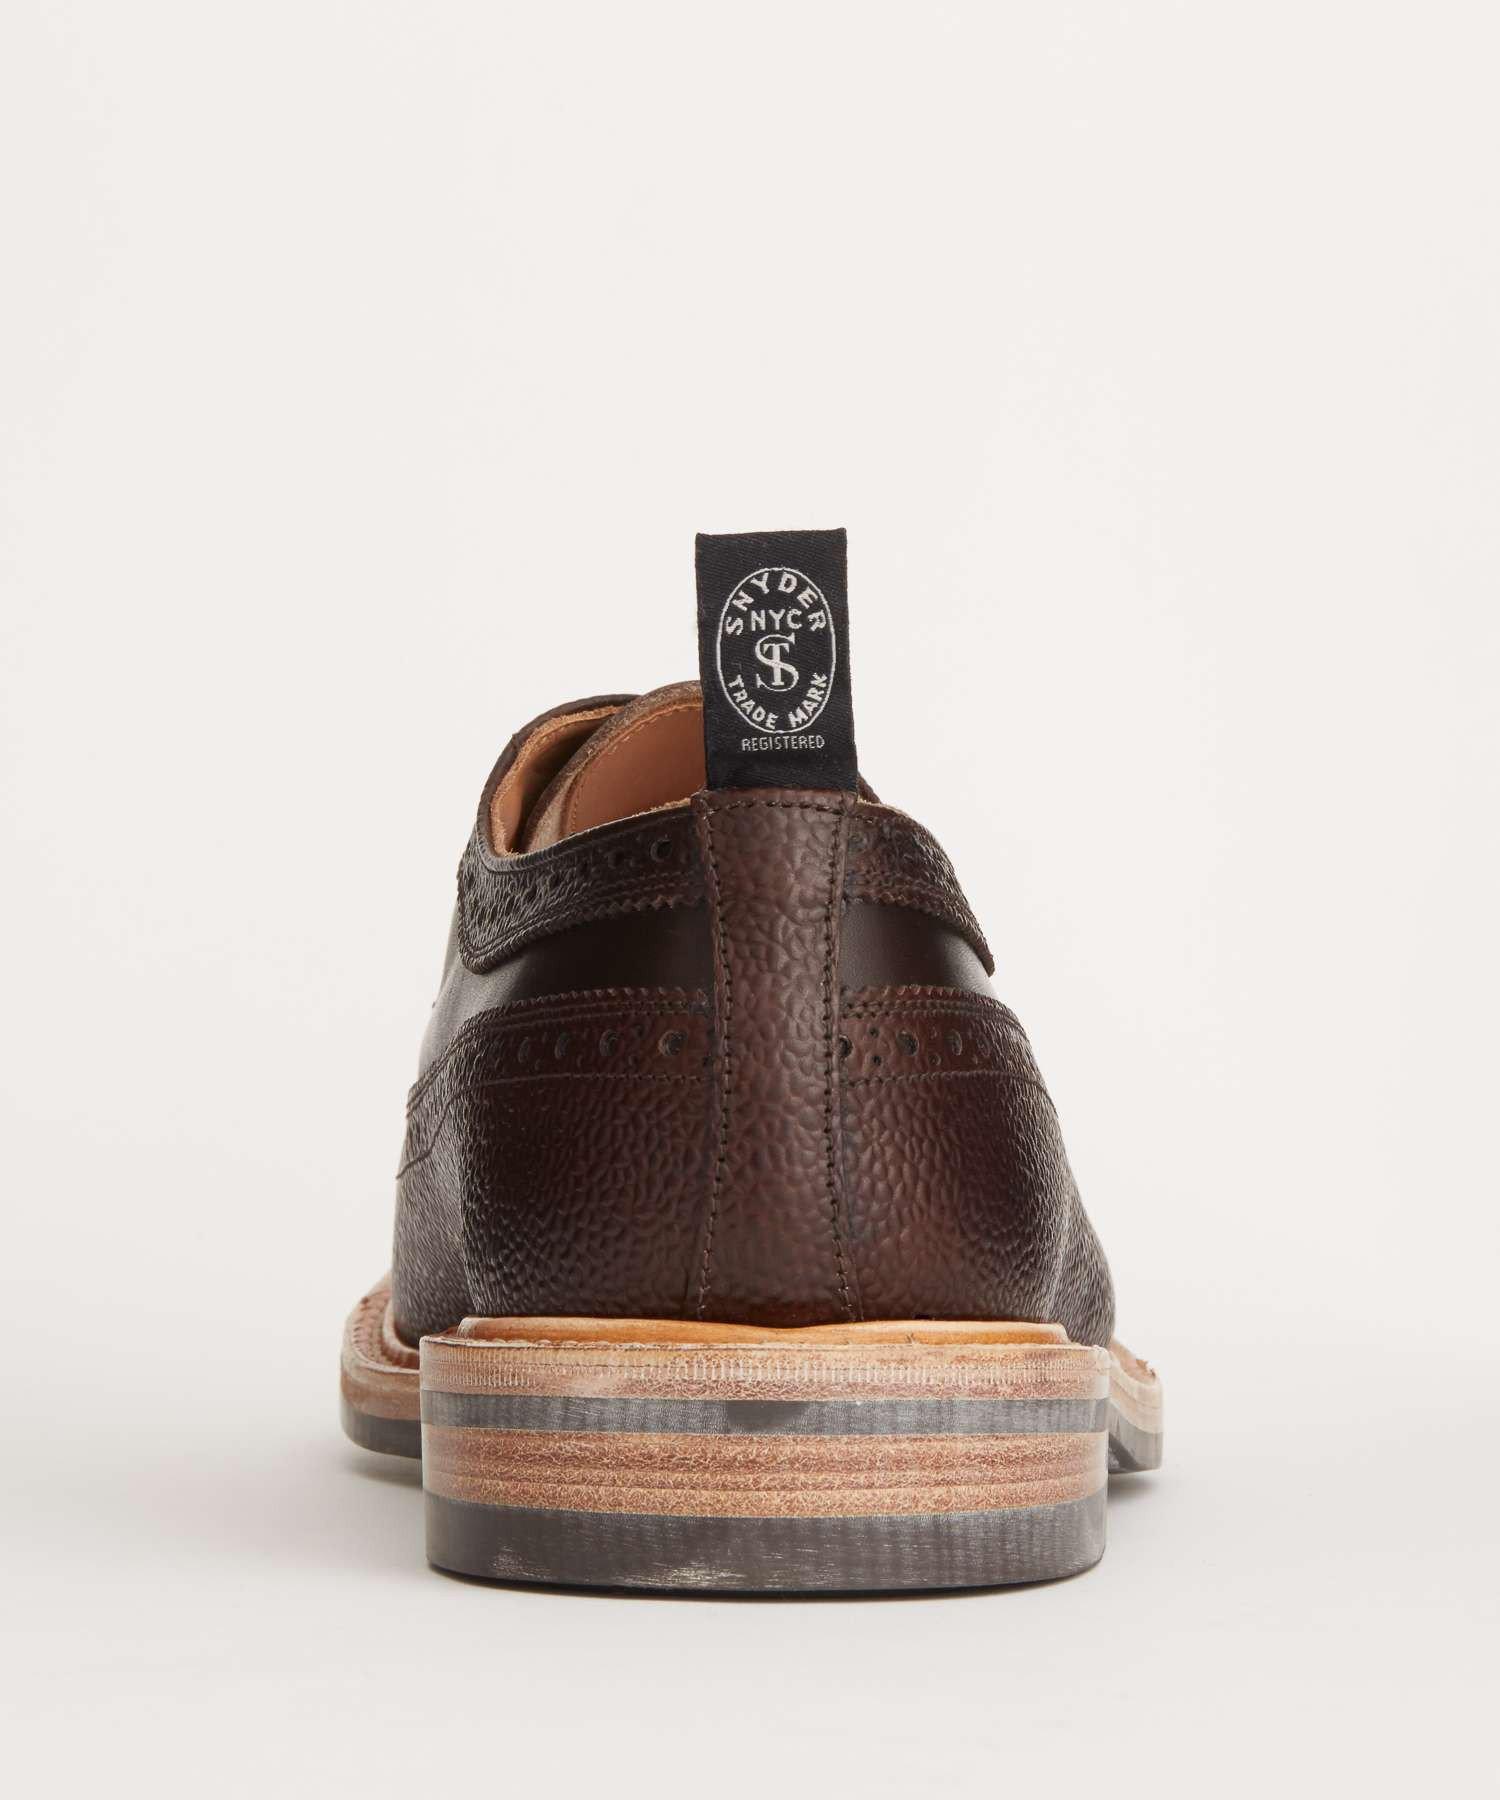 Tricker's Limited Edition Leather Brogue Shoe In Cafe Brown for Men - Lyst